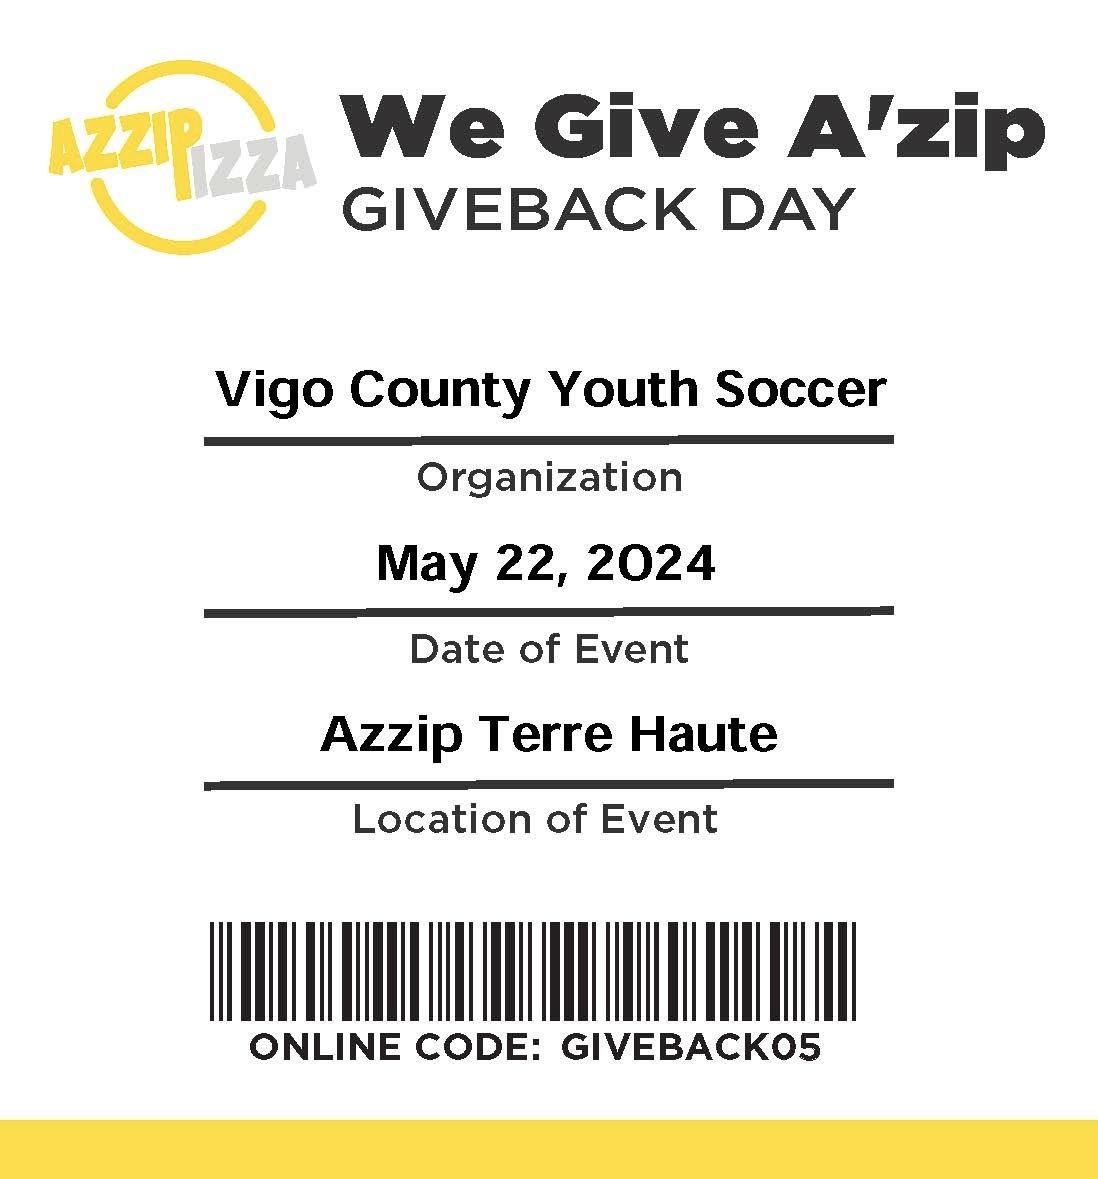 VCYSA - We Give A'zip Giveback Day